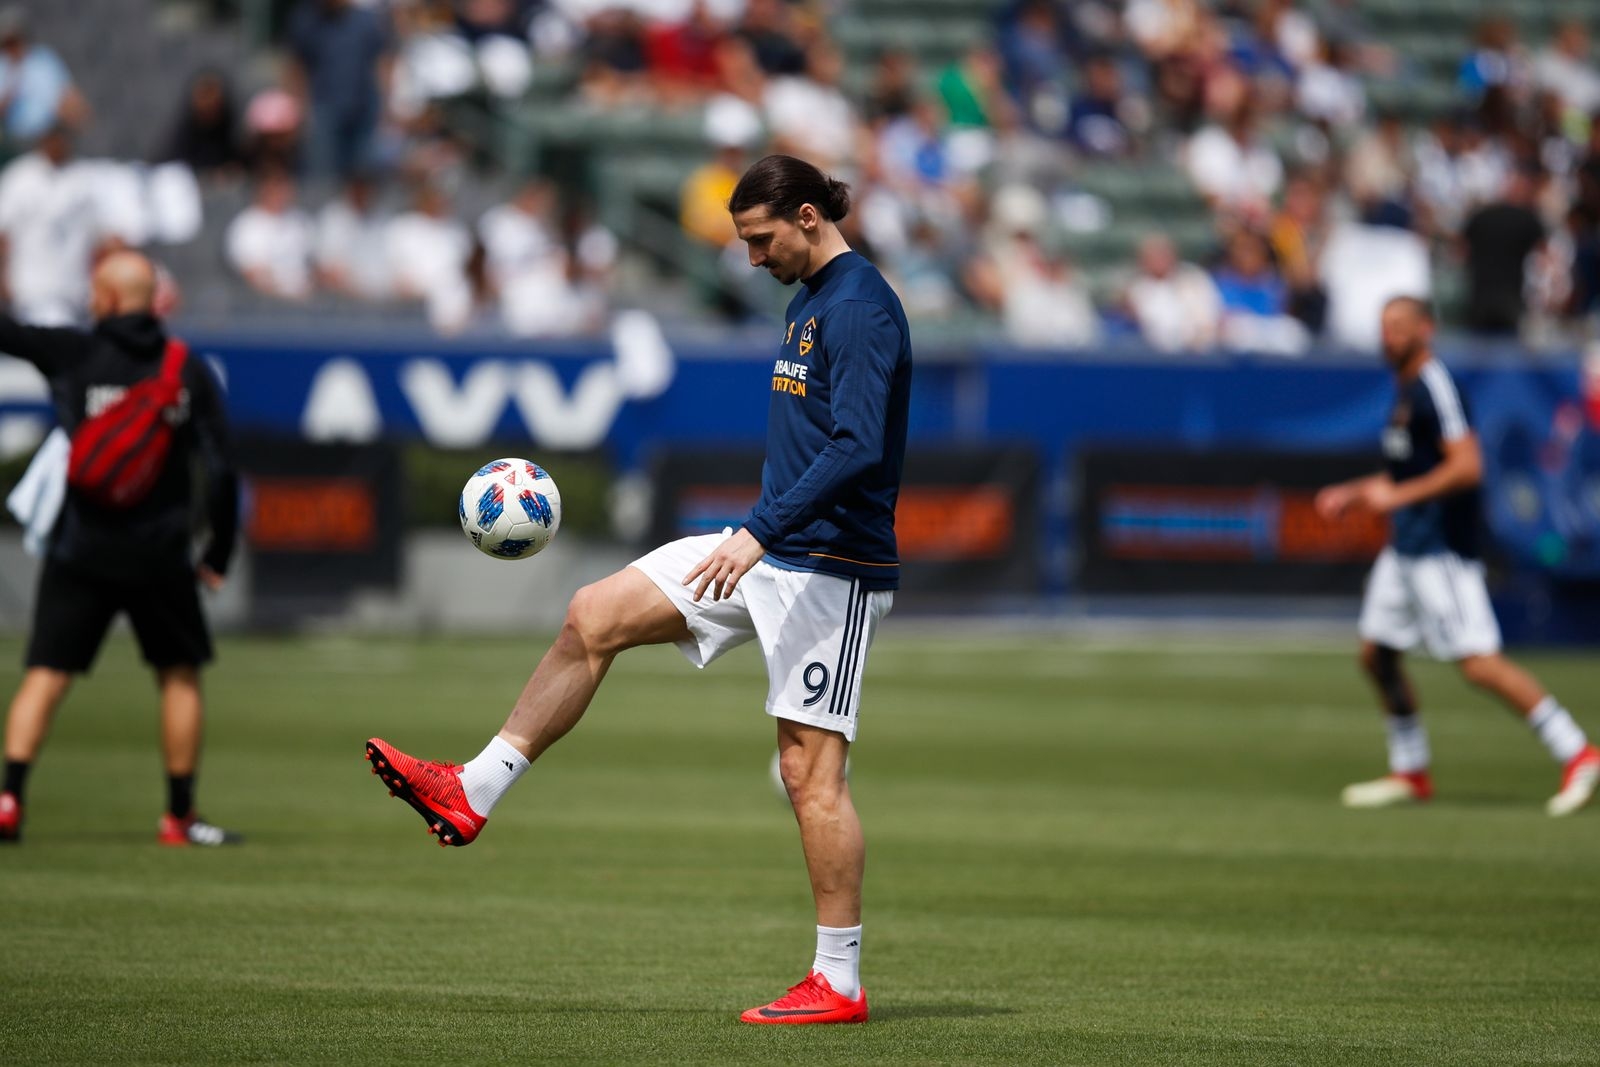 Los Angeles Galaxy's Zlatan Ibrahimovic, of Sweden, warms up before the team's MLS soccer match against the Los Angeles FC, Saturday, March 31, 2018, in Carson, Calif. (AP Photo/Jae C. Hong)